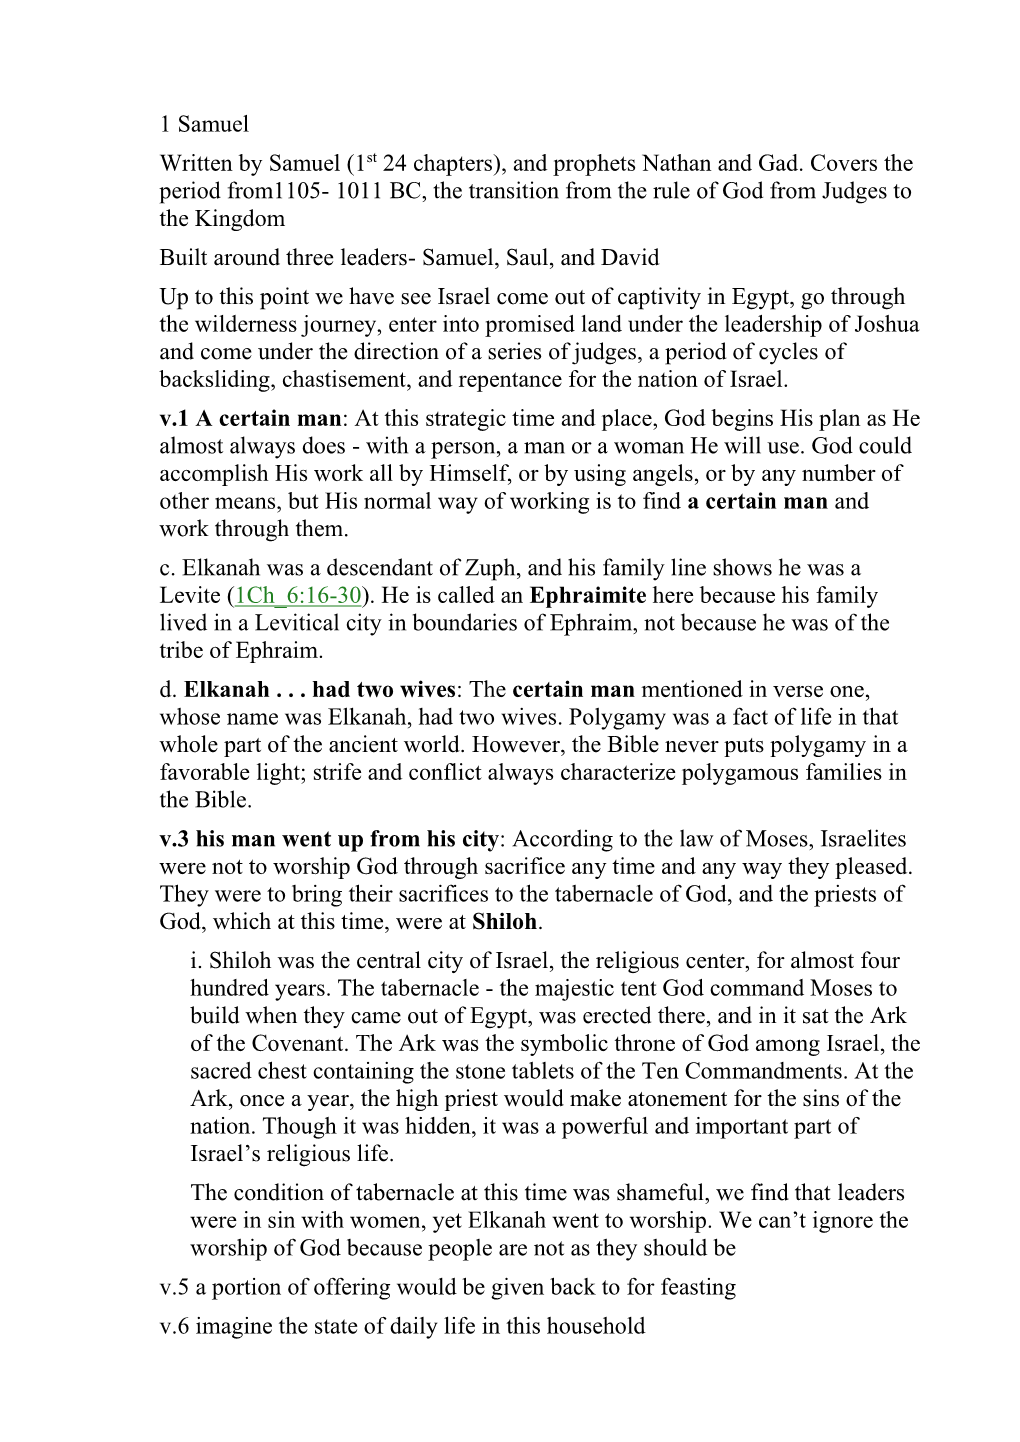 1 Samuel Written by Samuel (1St 24 Chapters), and Prophets Nathan and Gad